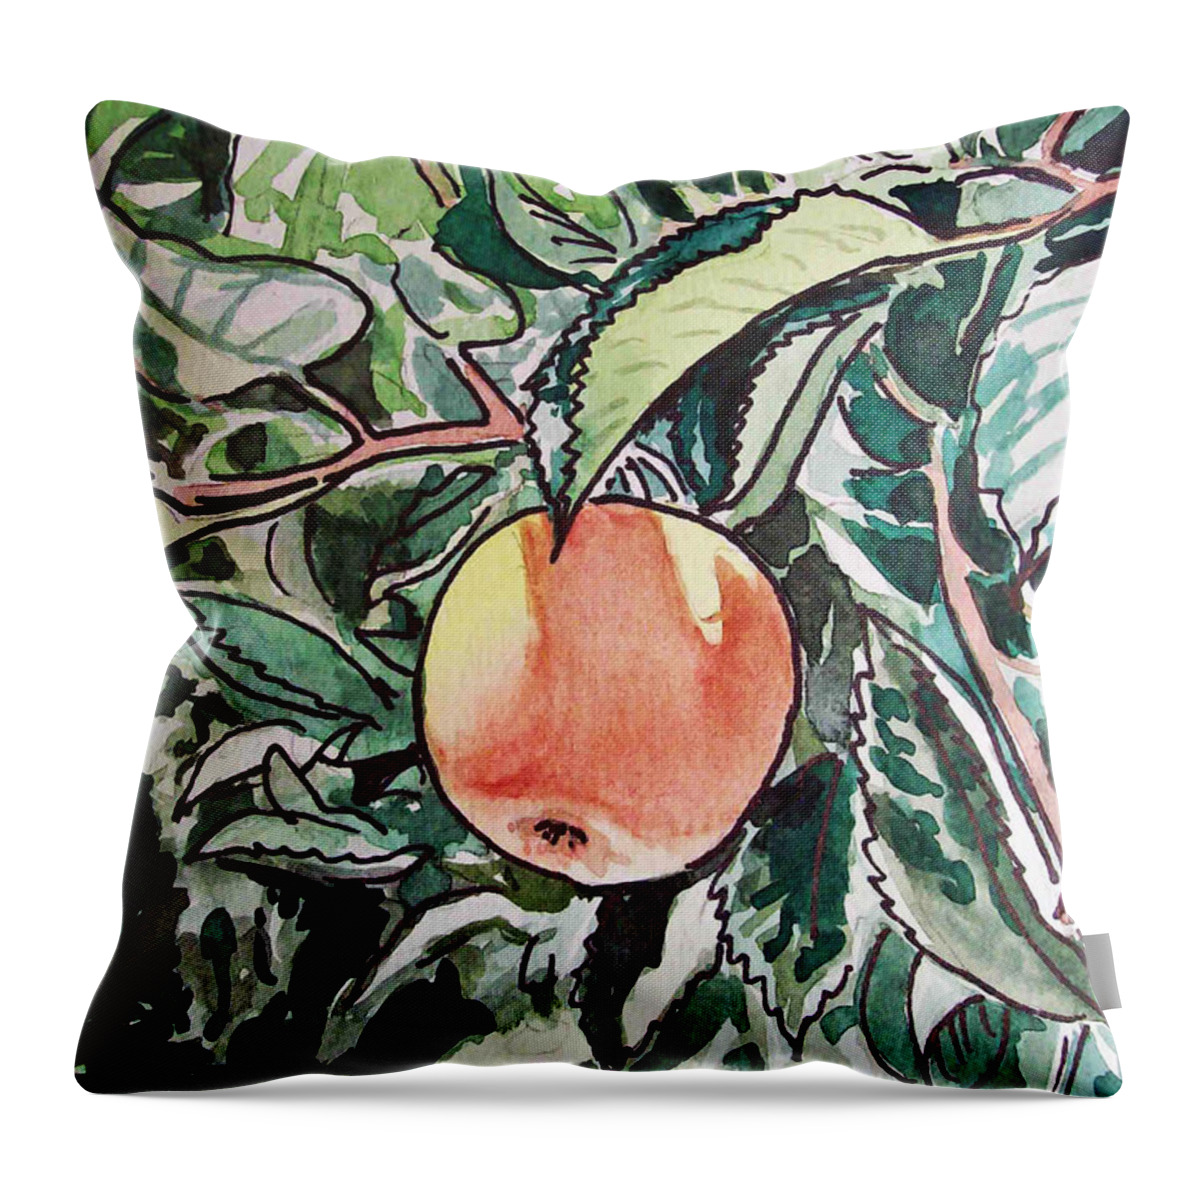 Sketch Throw Pillow featuring the painting Apple Tree Sketchbook Project Down My Street by Irina Sztukowski